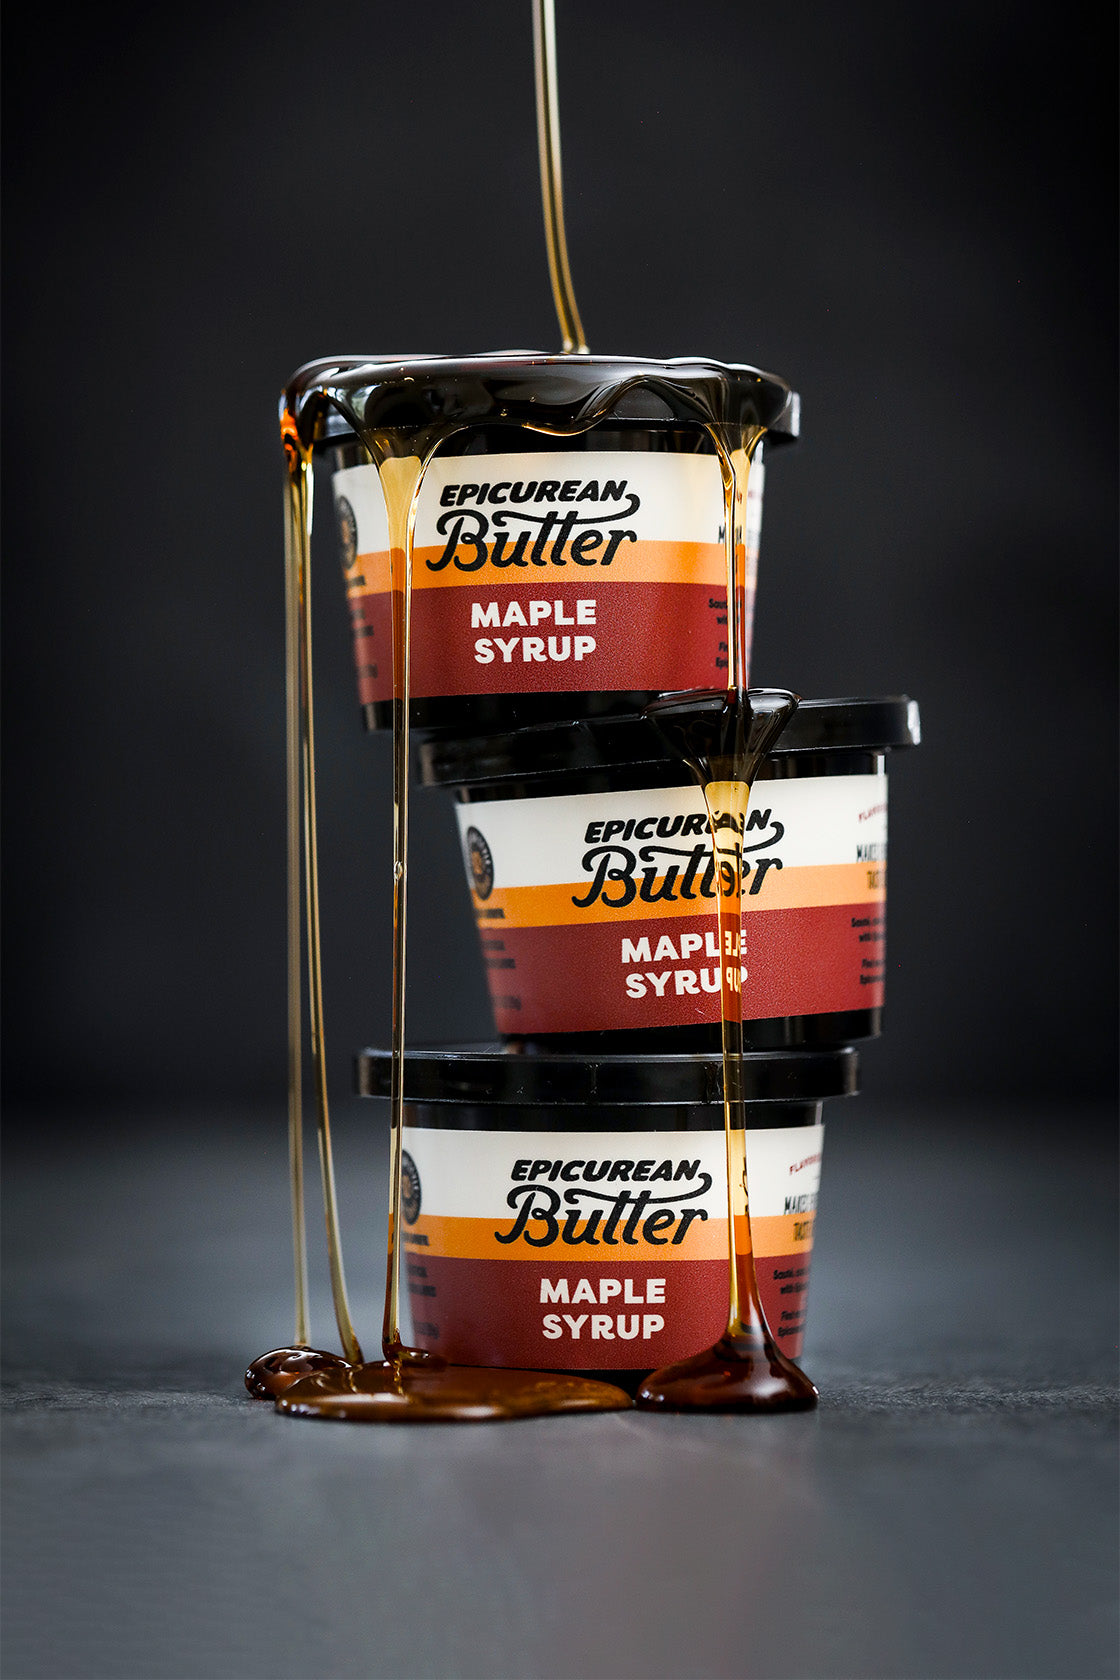 Epicurean Butter Maple Syrup Flavored Butter stack with maple syrup drizzle